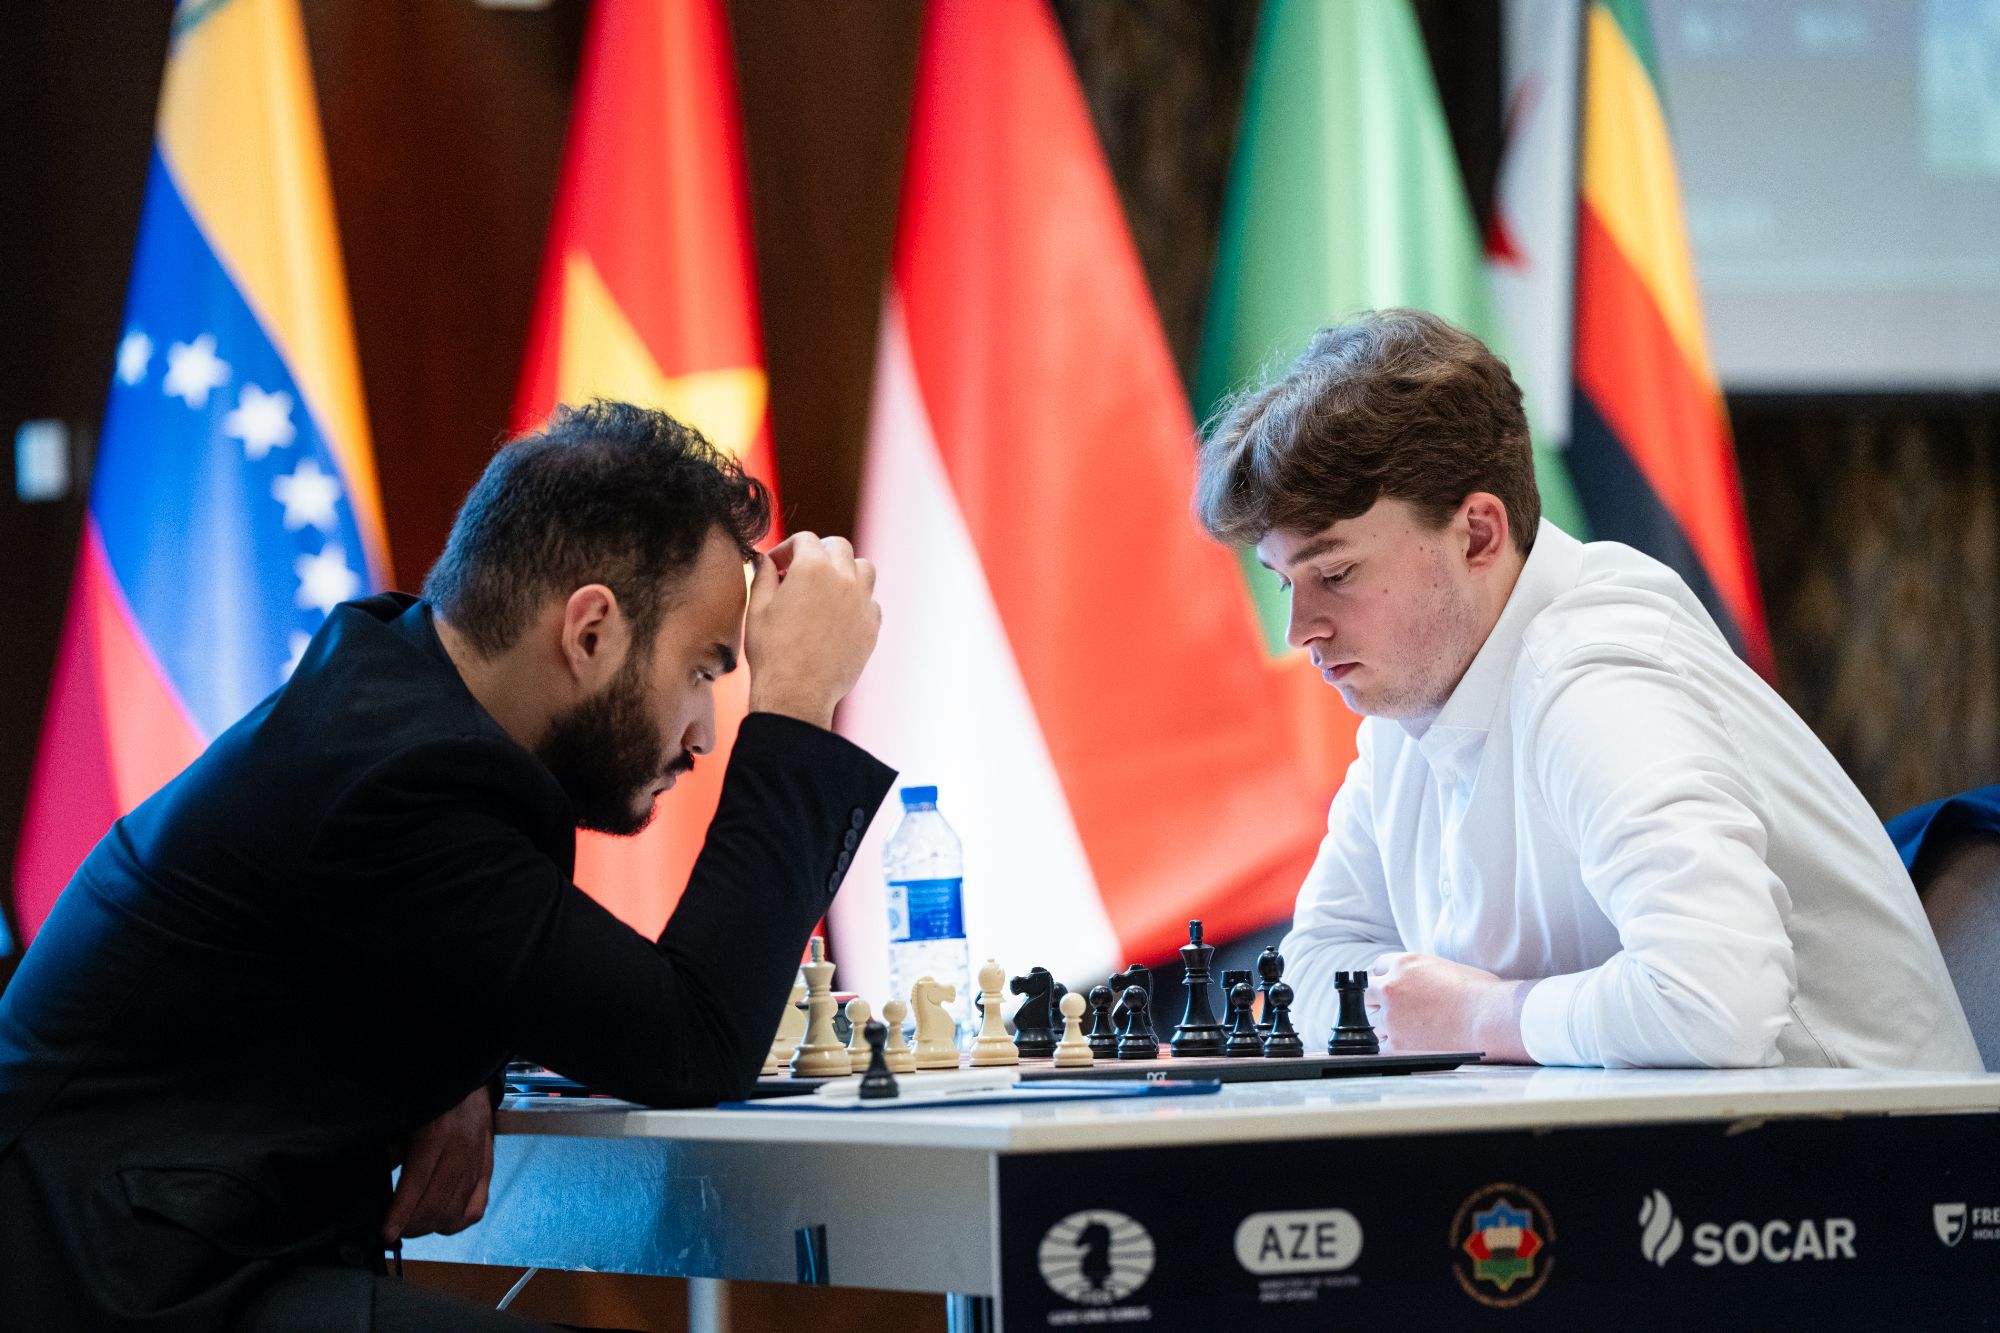 Ivan Cheparinov: The most important for me is to win the last round of the  day